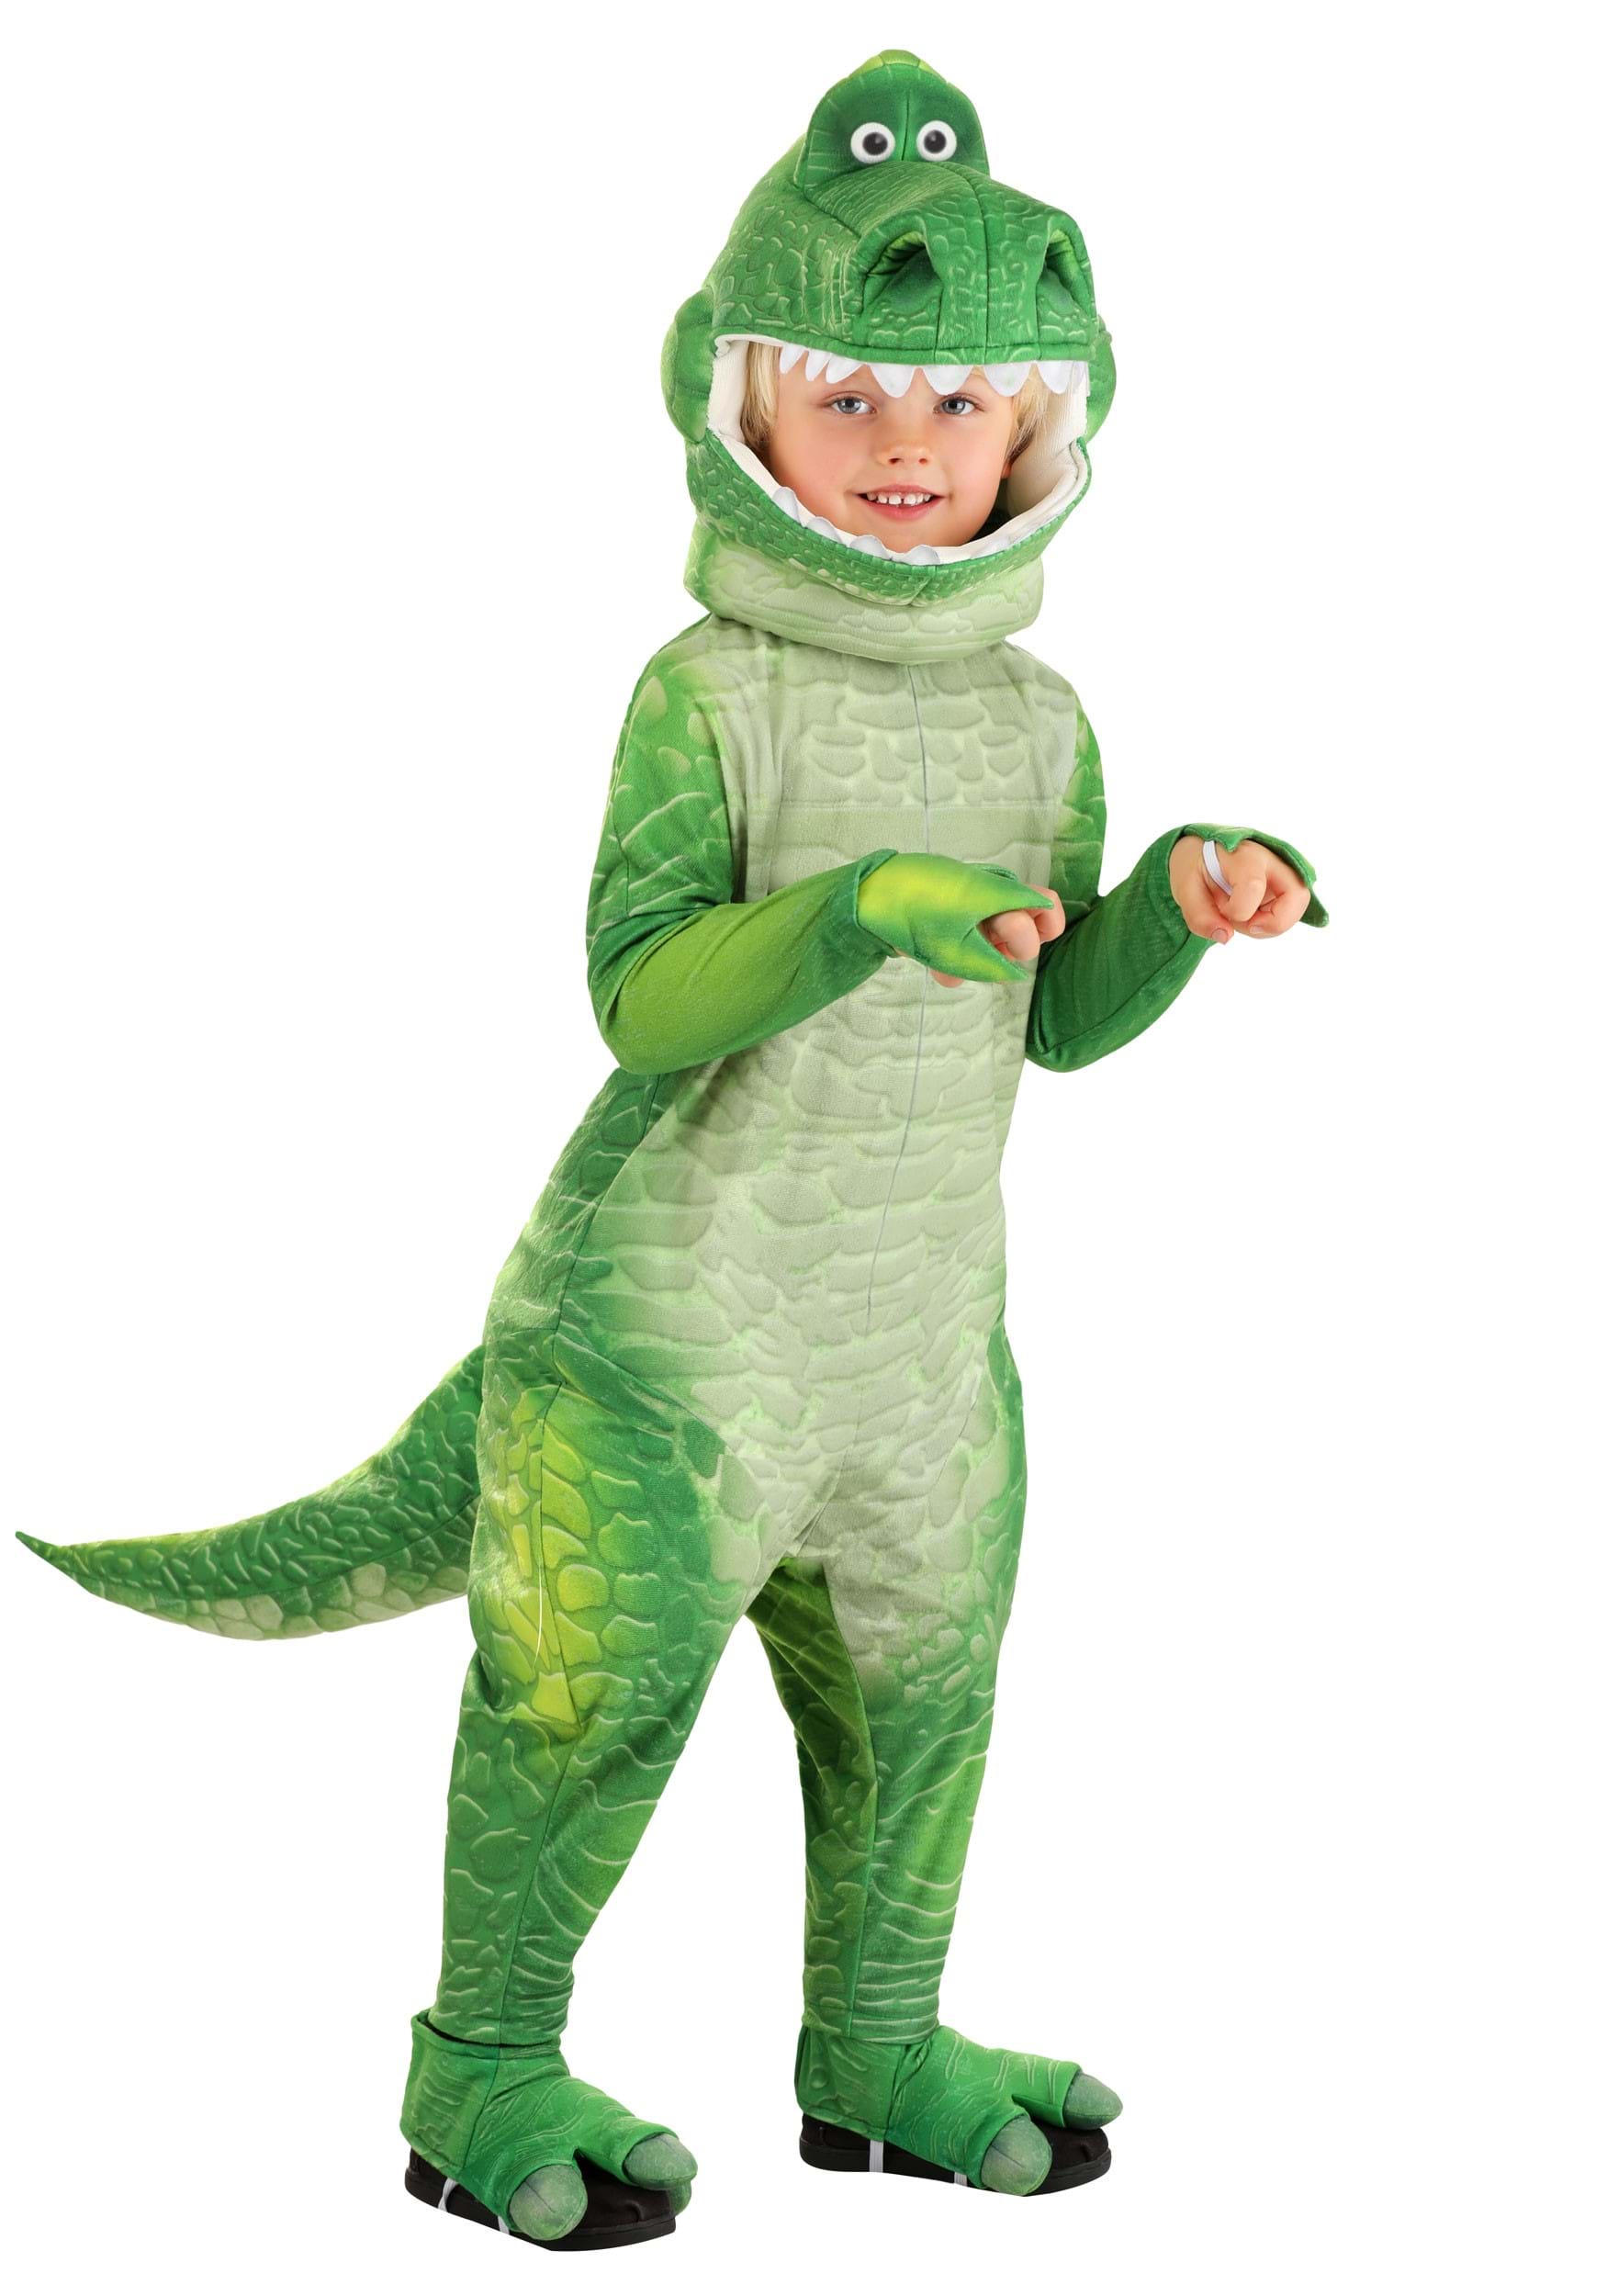 Photos - Fancy Dress Deluxe FUN Costumes  Toy Story Rex Costume for Toddlers | Disney Costumes G 